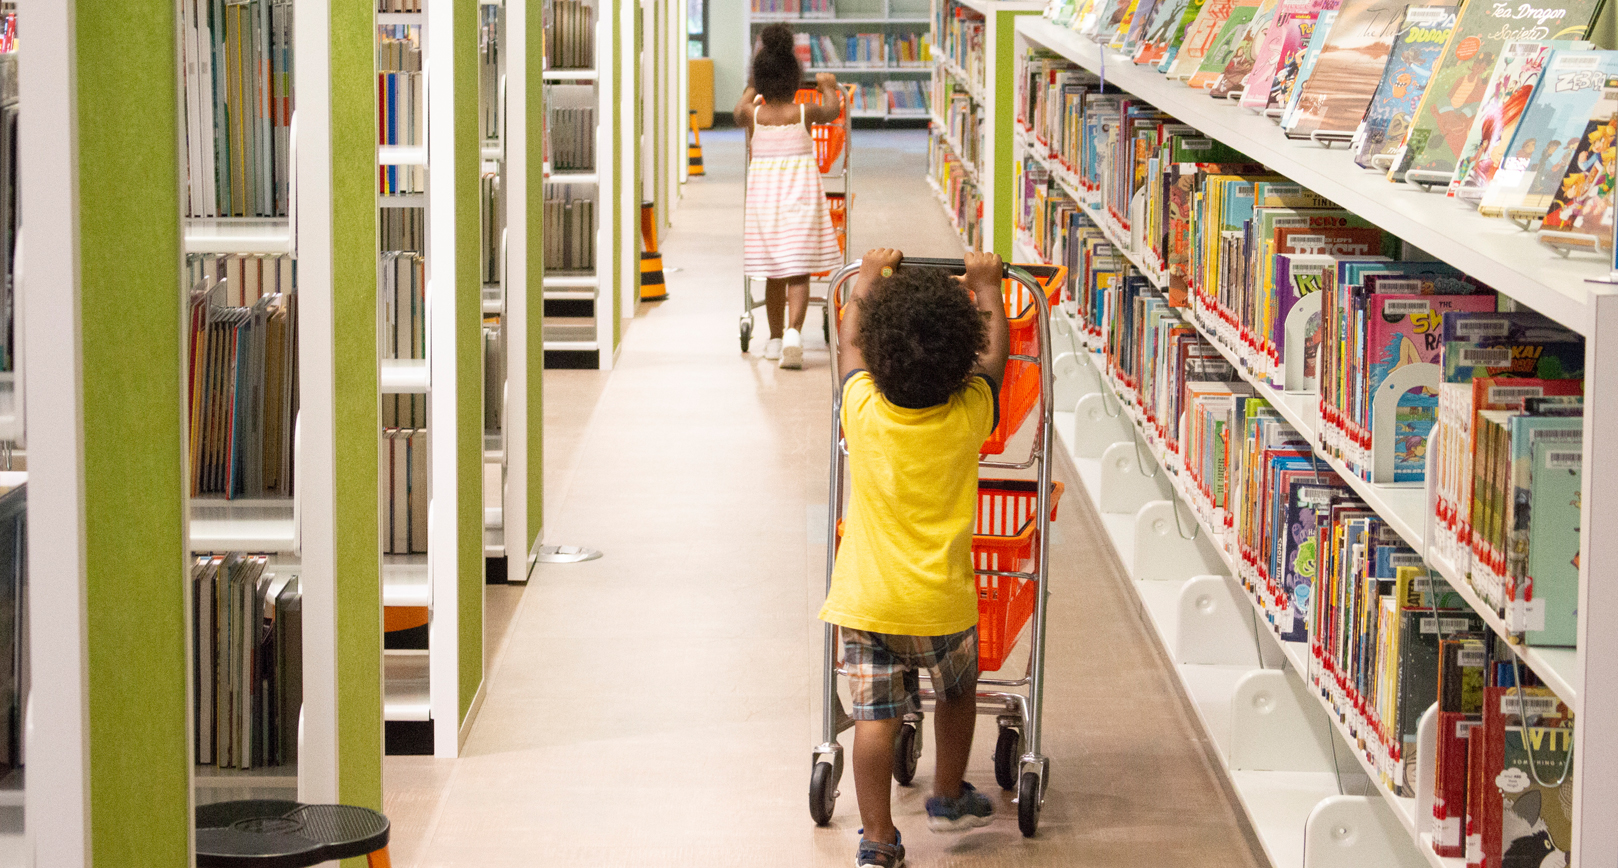 two children in the children's section of a library pushing shopping carts filled with books down the aisle